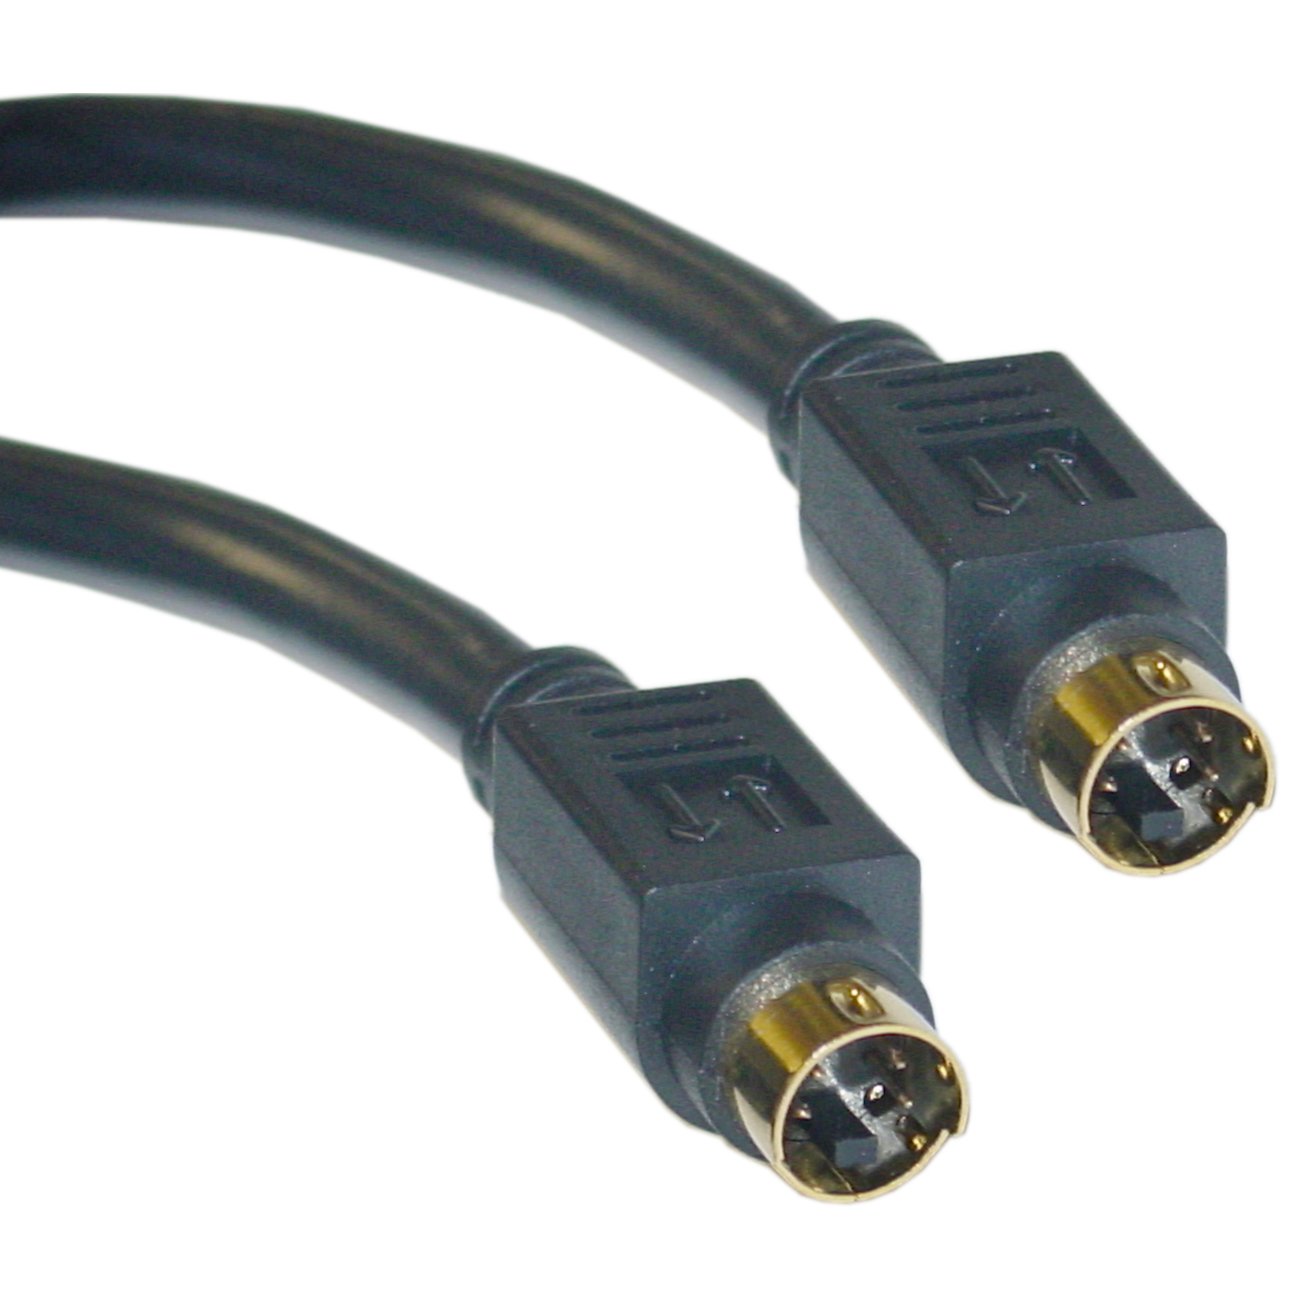 CableWholesale S-Video Cable for TV, S-VHS, VCRs, DVD, Camcorders, Video Cards - Mini Din 4-Pin Male to Male S-Video Cable, Gold